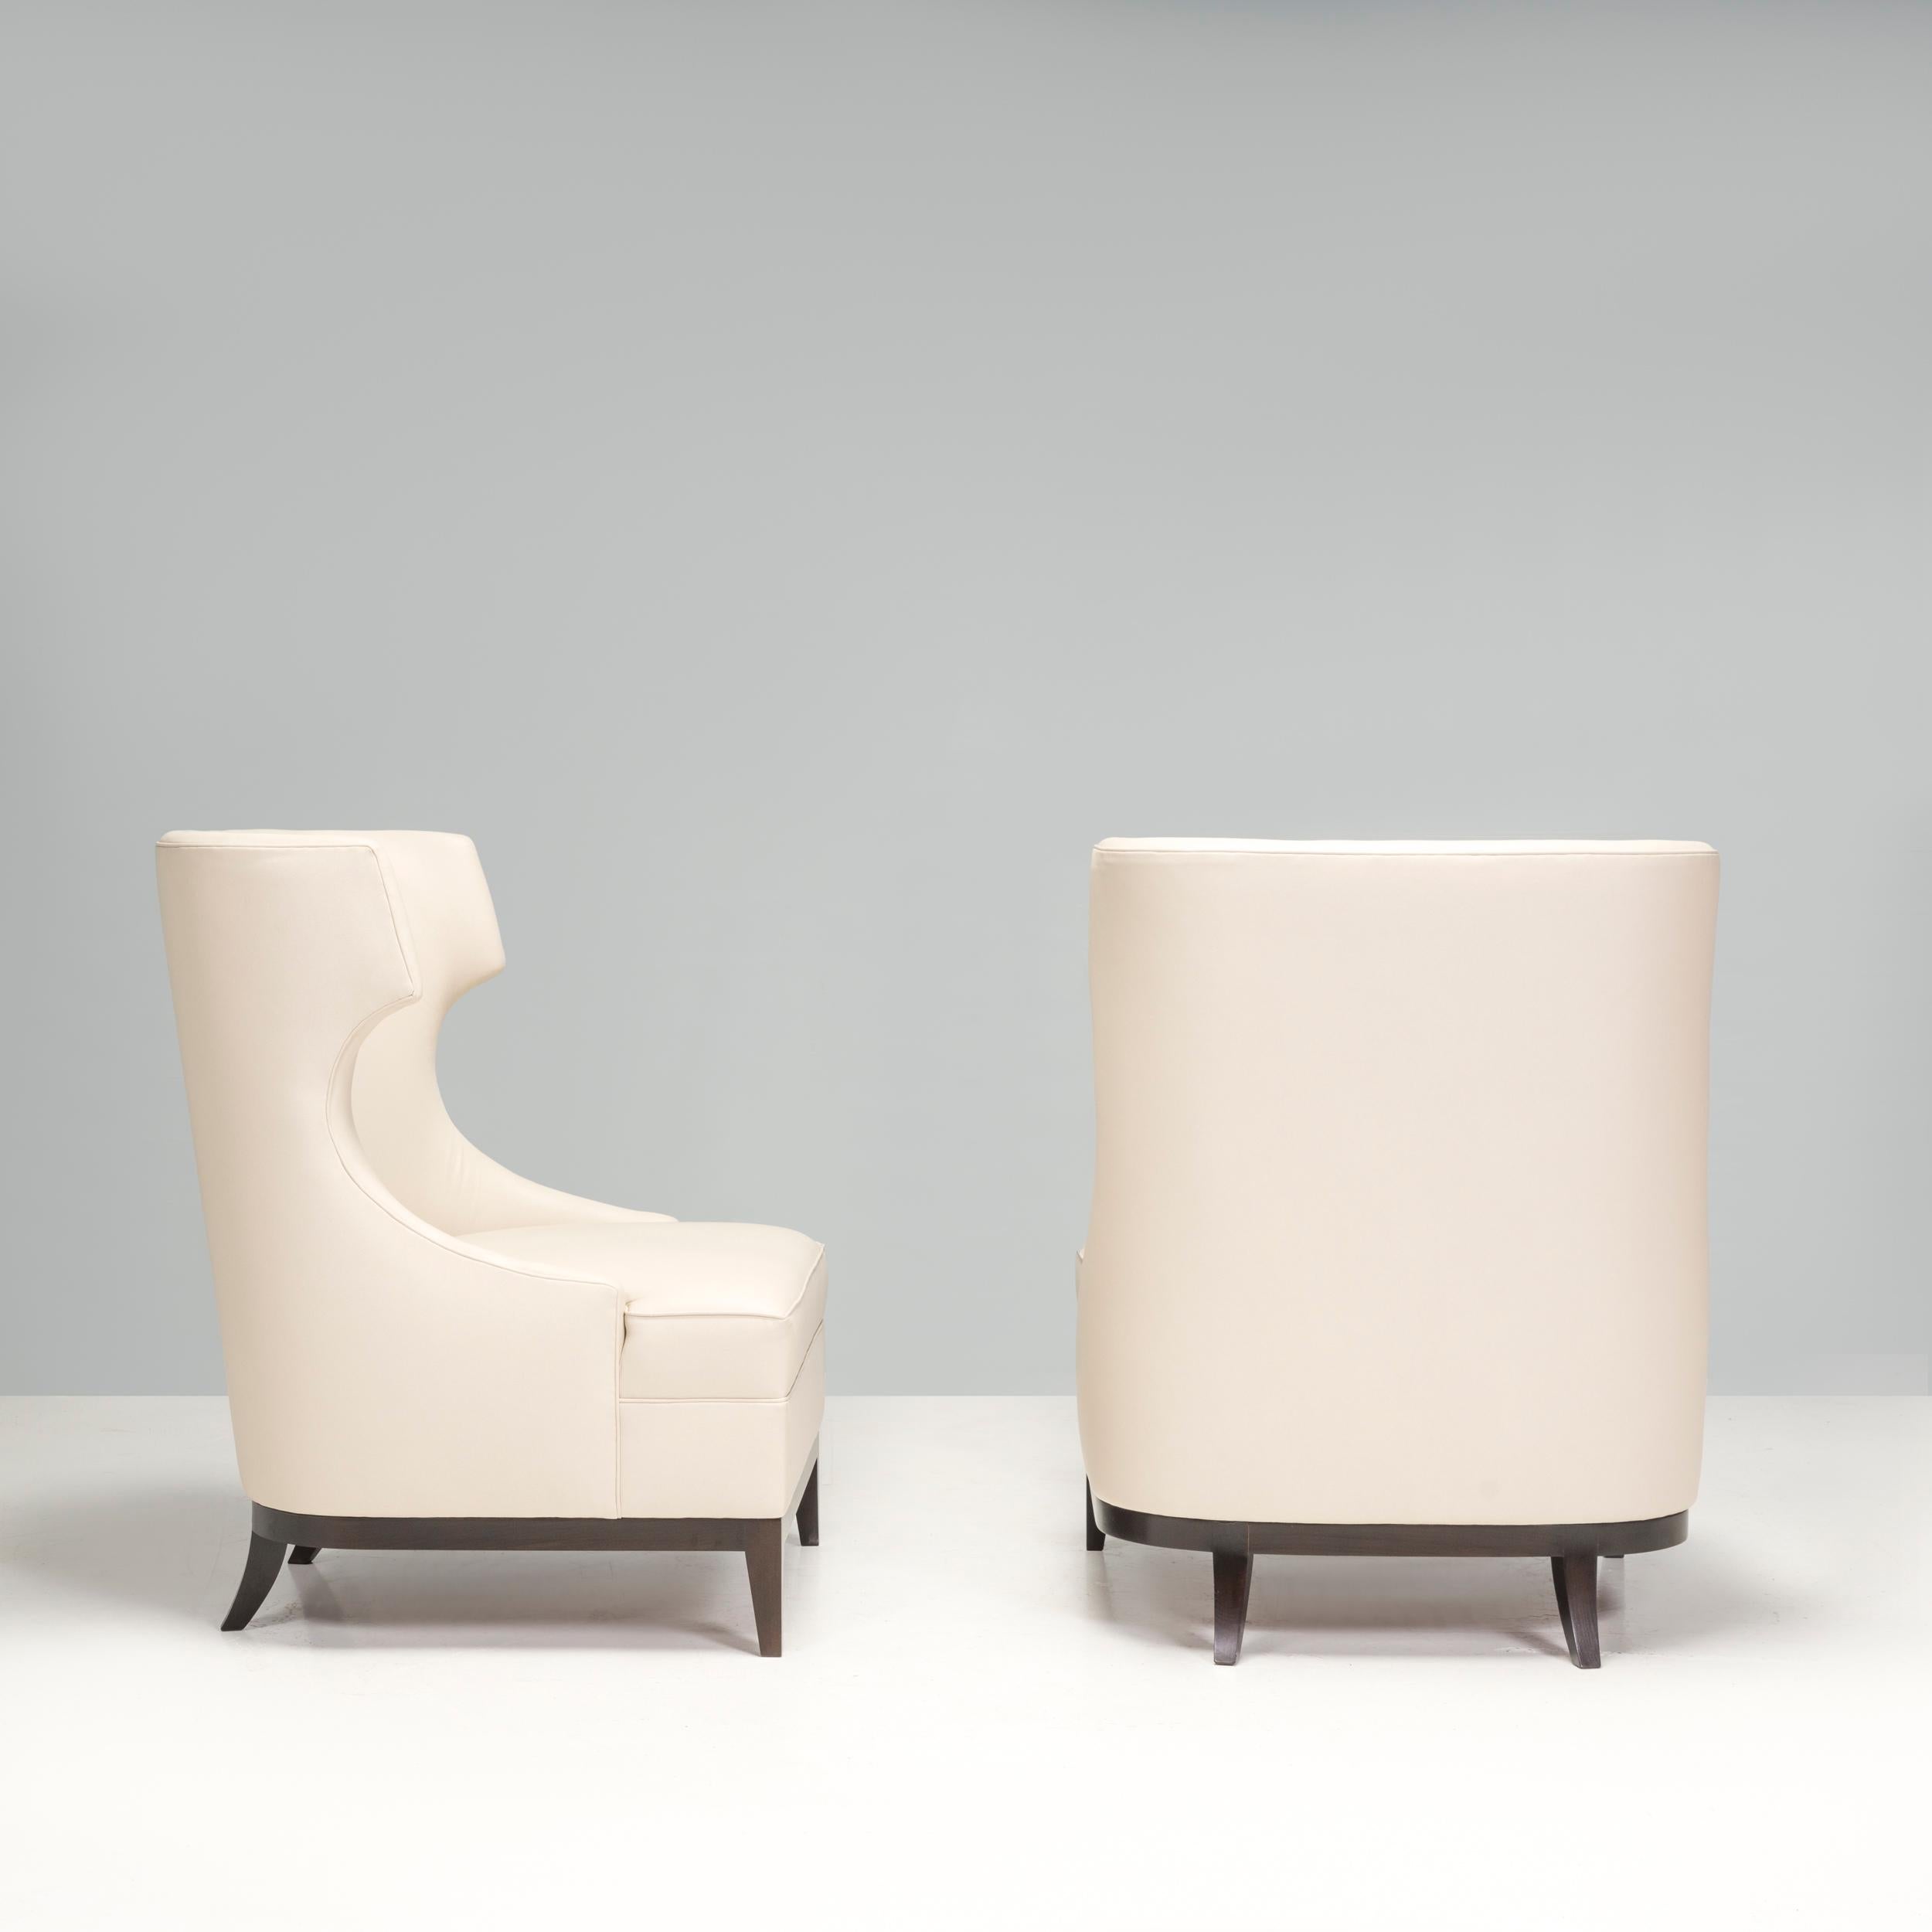 Bespoke Cream Leather High Back Wingback Armchairs, Set of Two In Excellent Condition For Sale In London, GB